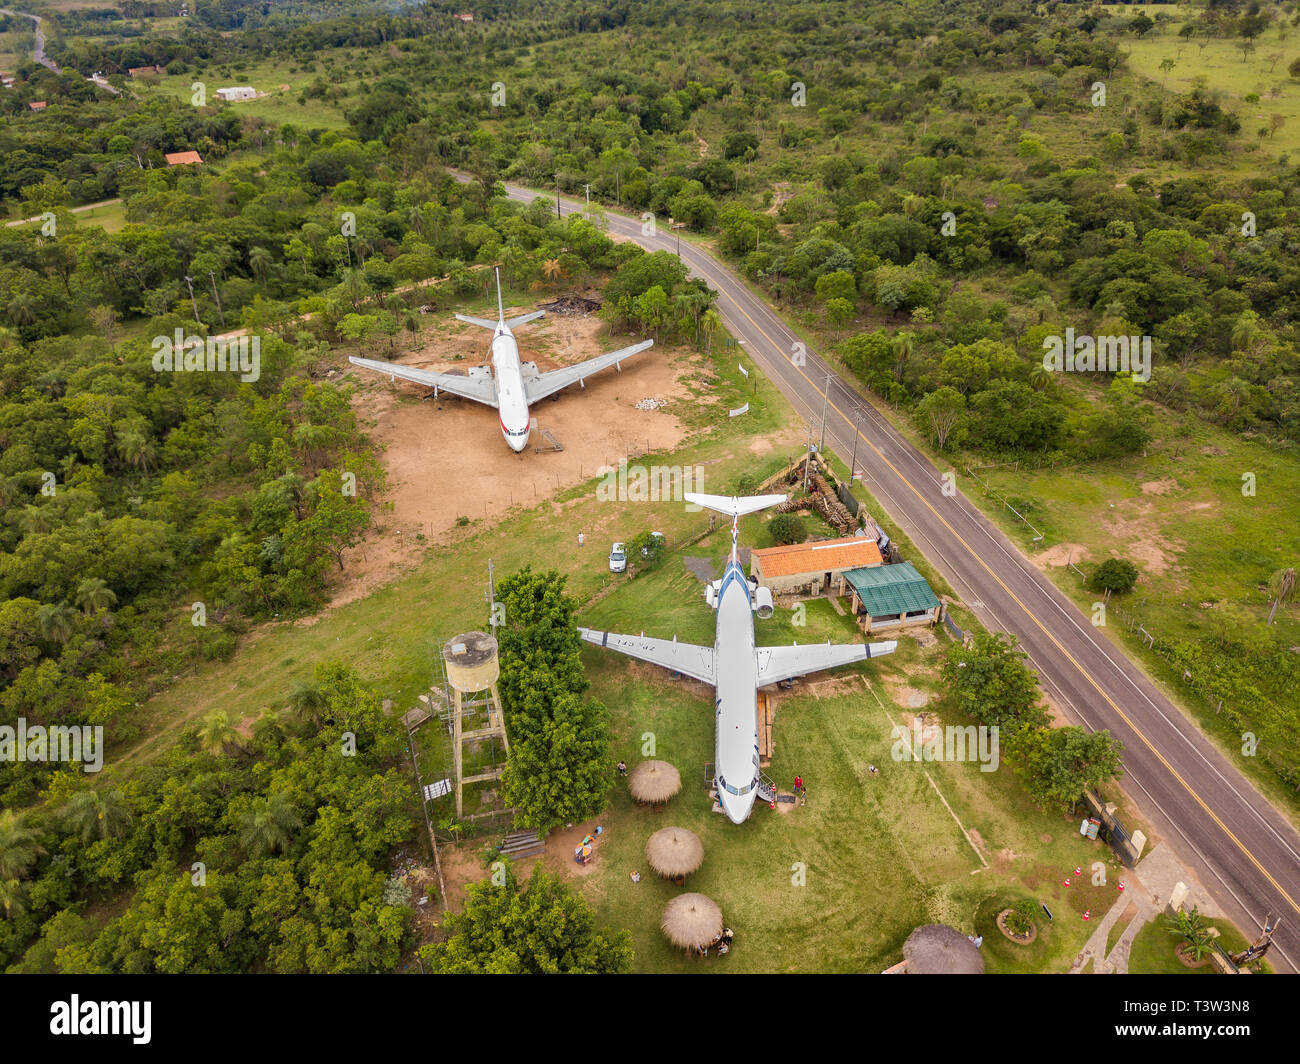 Loma Grande, Paraguay - 07 November 2017: Aerial view of two discarded aircraft on a private lot. The plots around the aircraft are for sale. Stock Photo